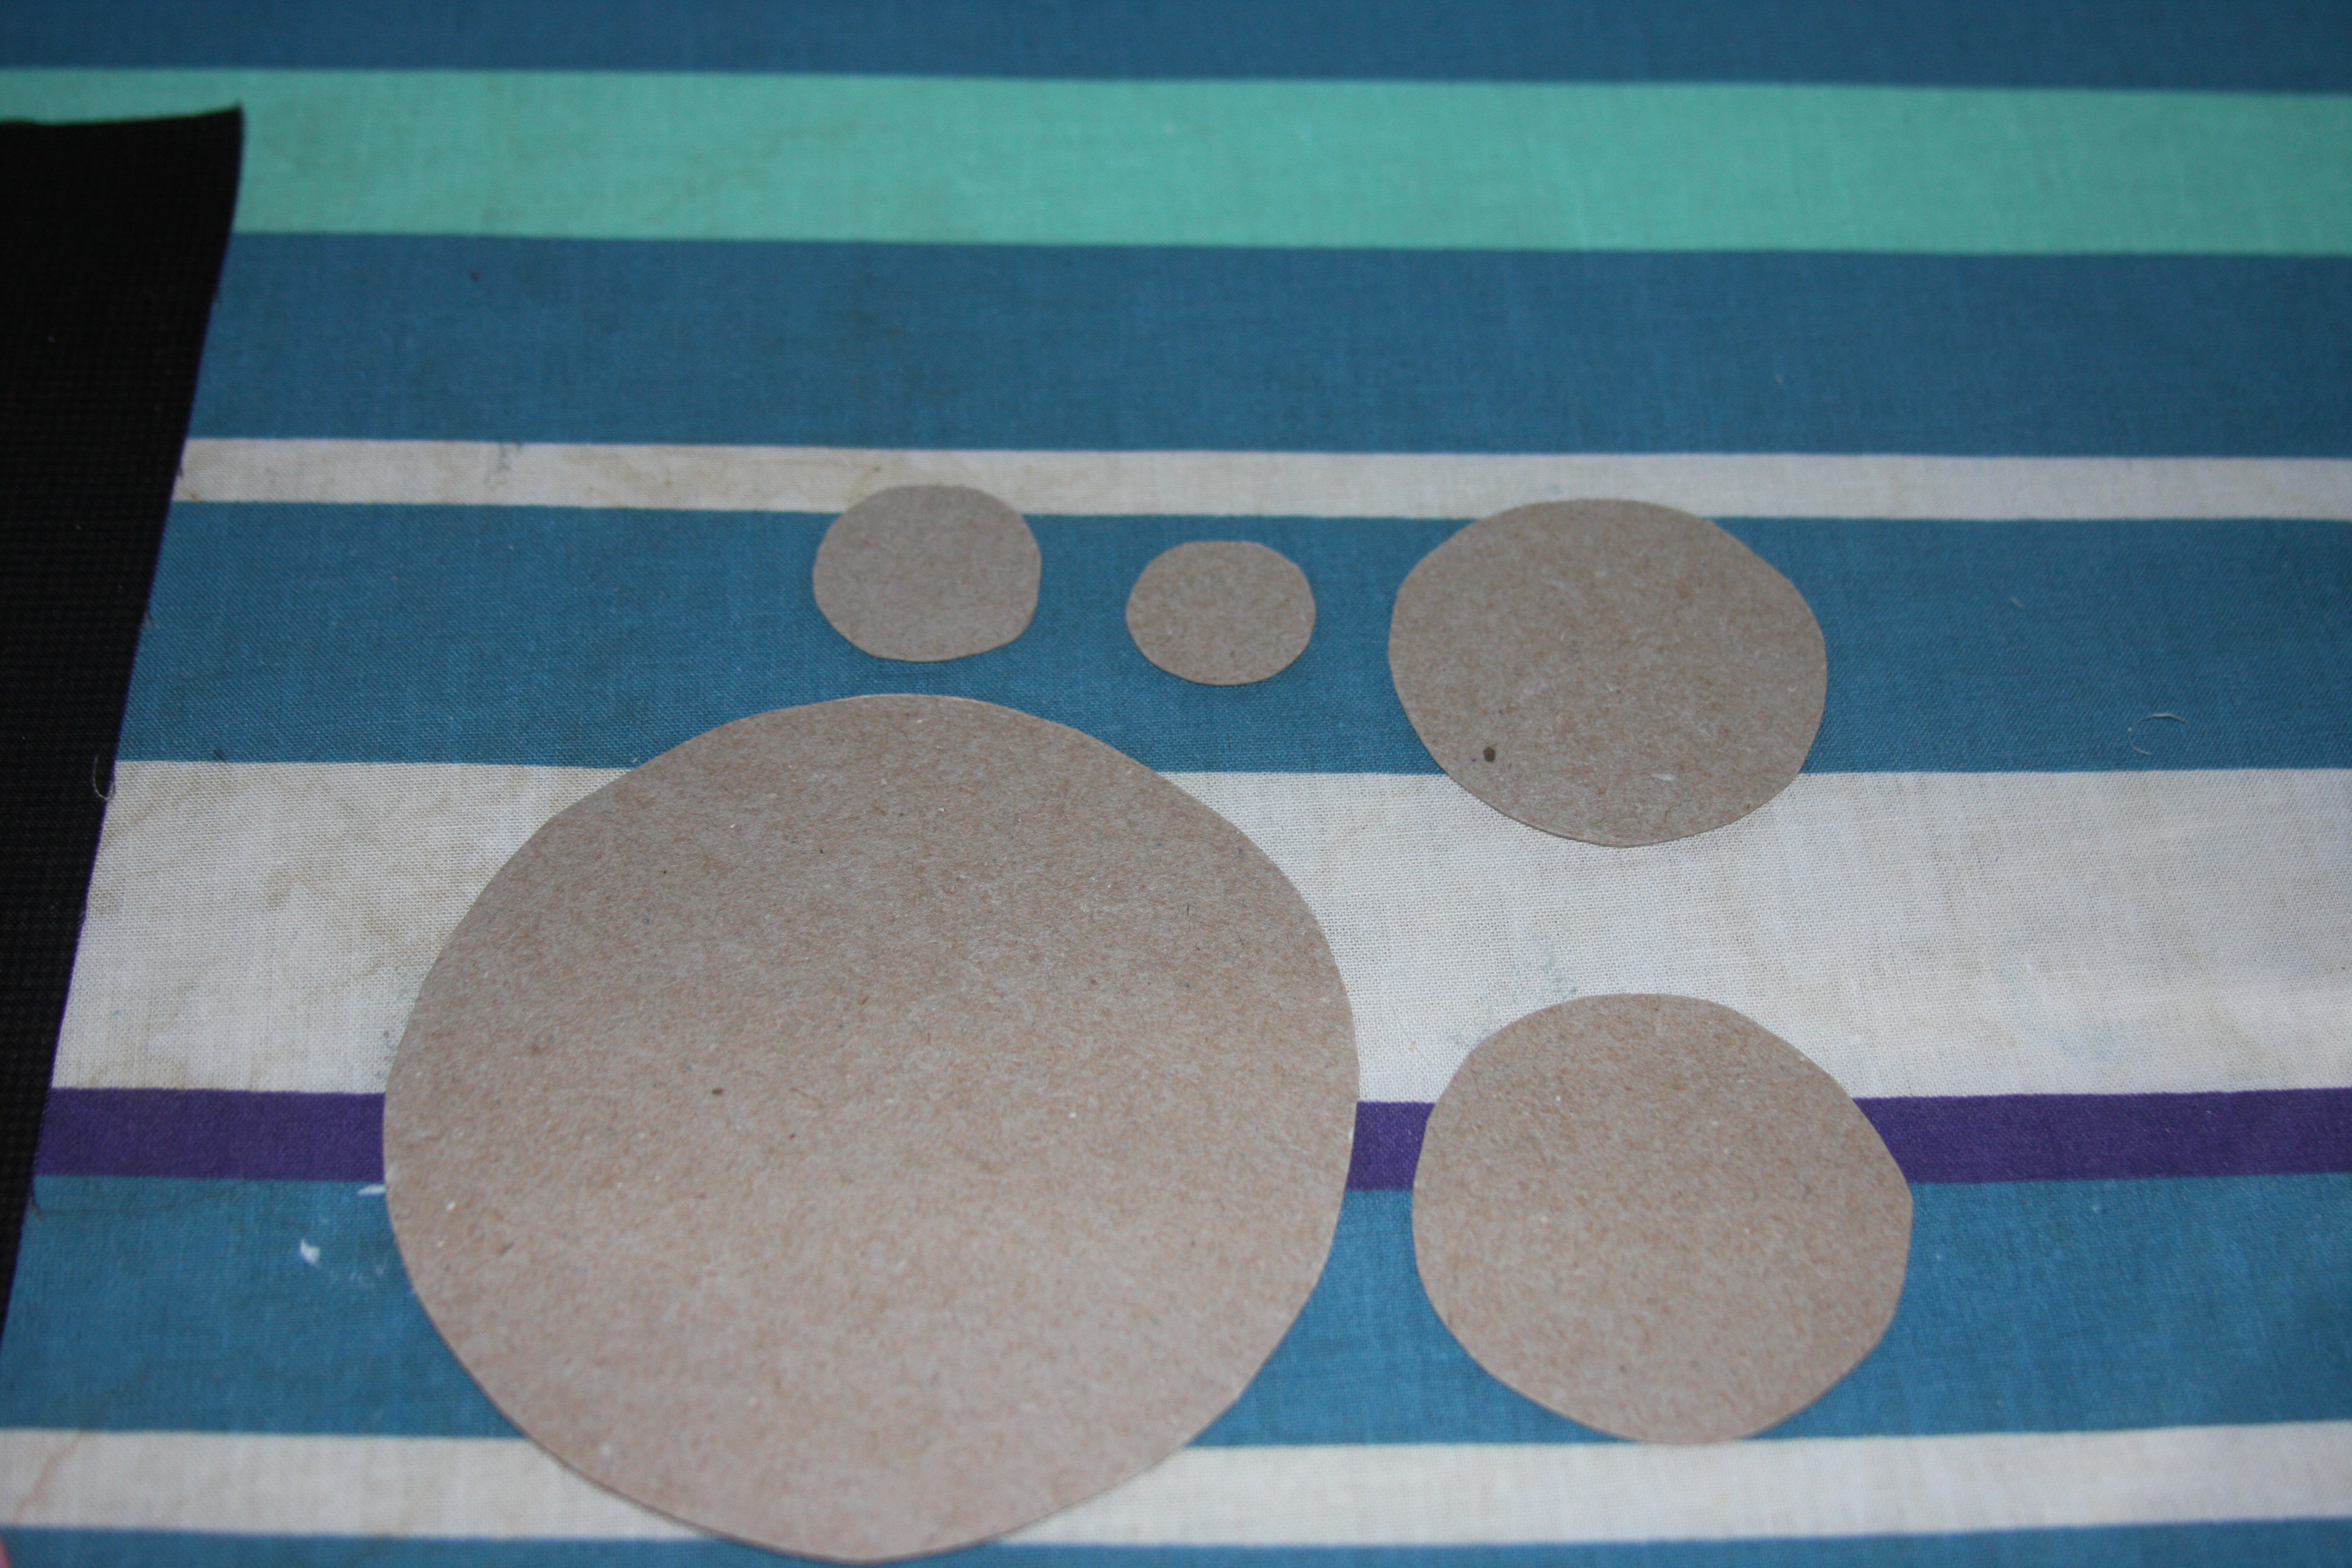 How to make Perfect Circles for Applique